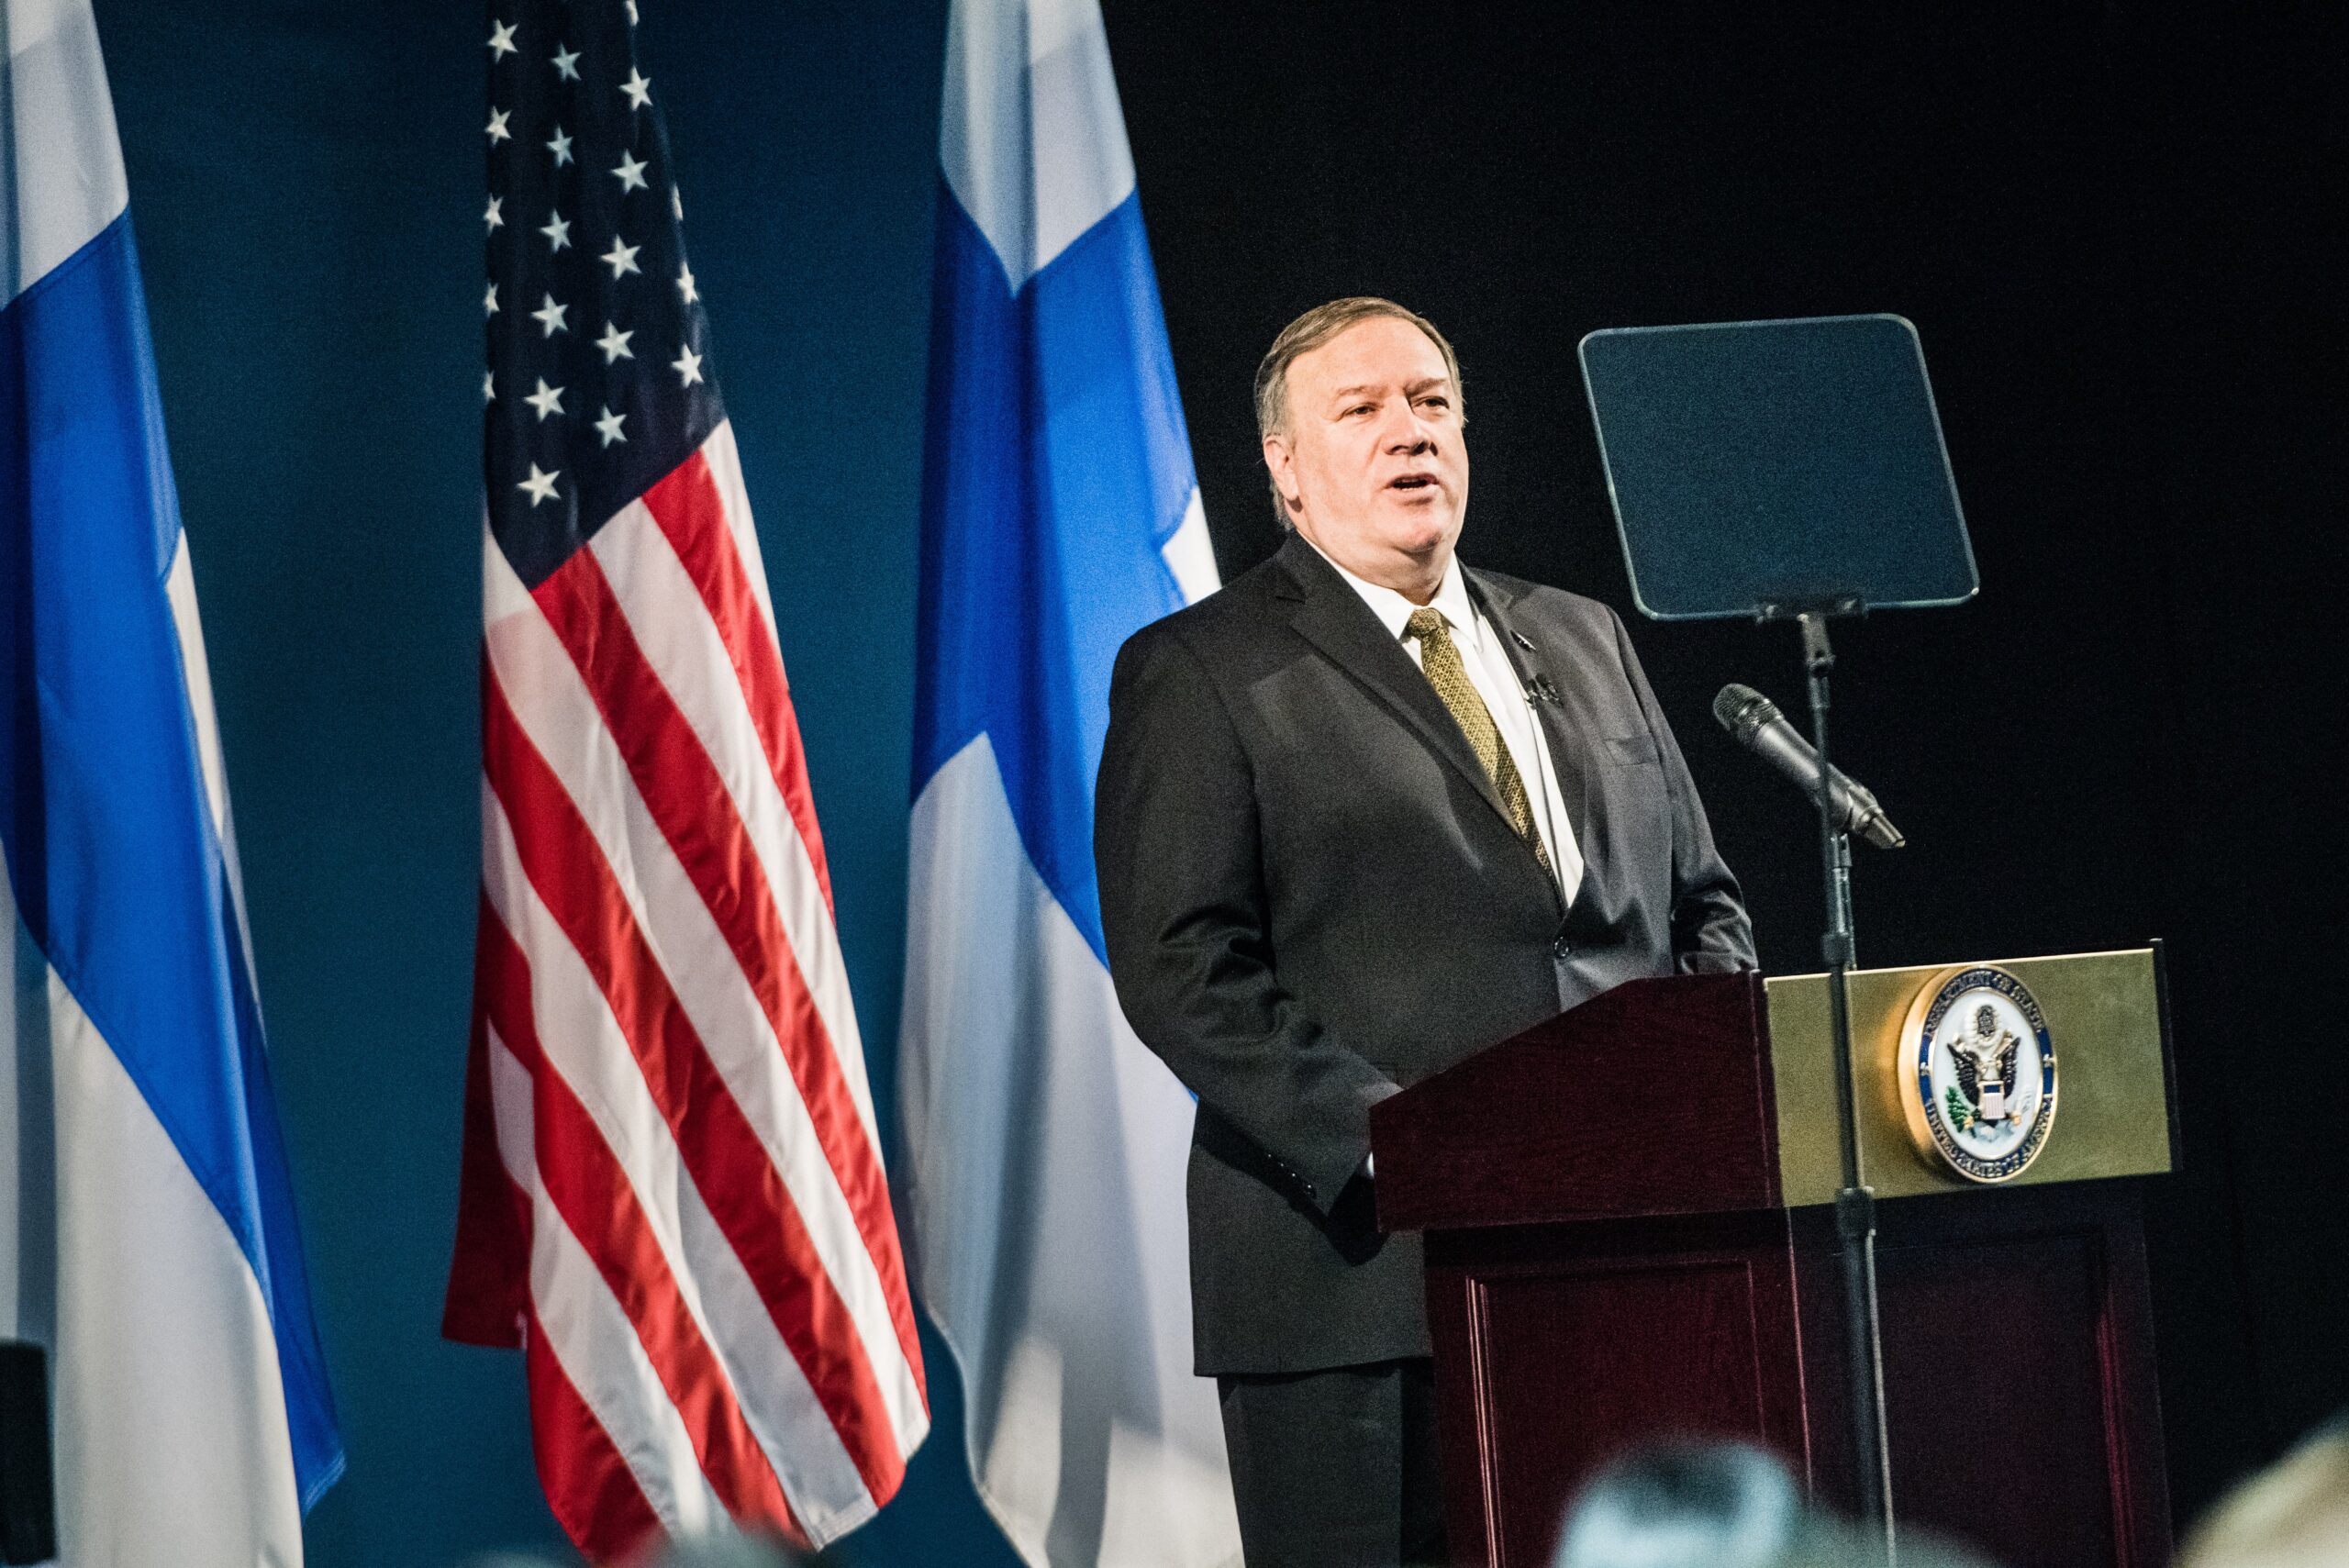 Then-U.S. Secretary of State Mike Pompeo at a rostrum, with the Finnish and United States' flags in the background